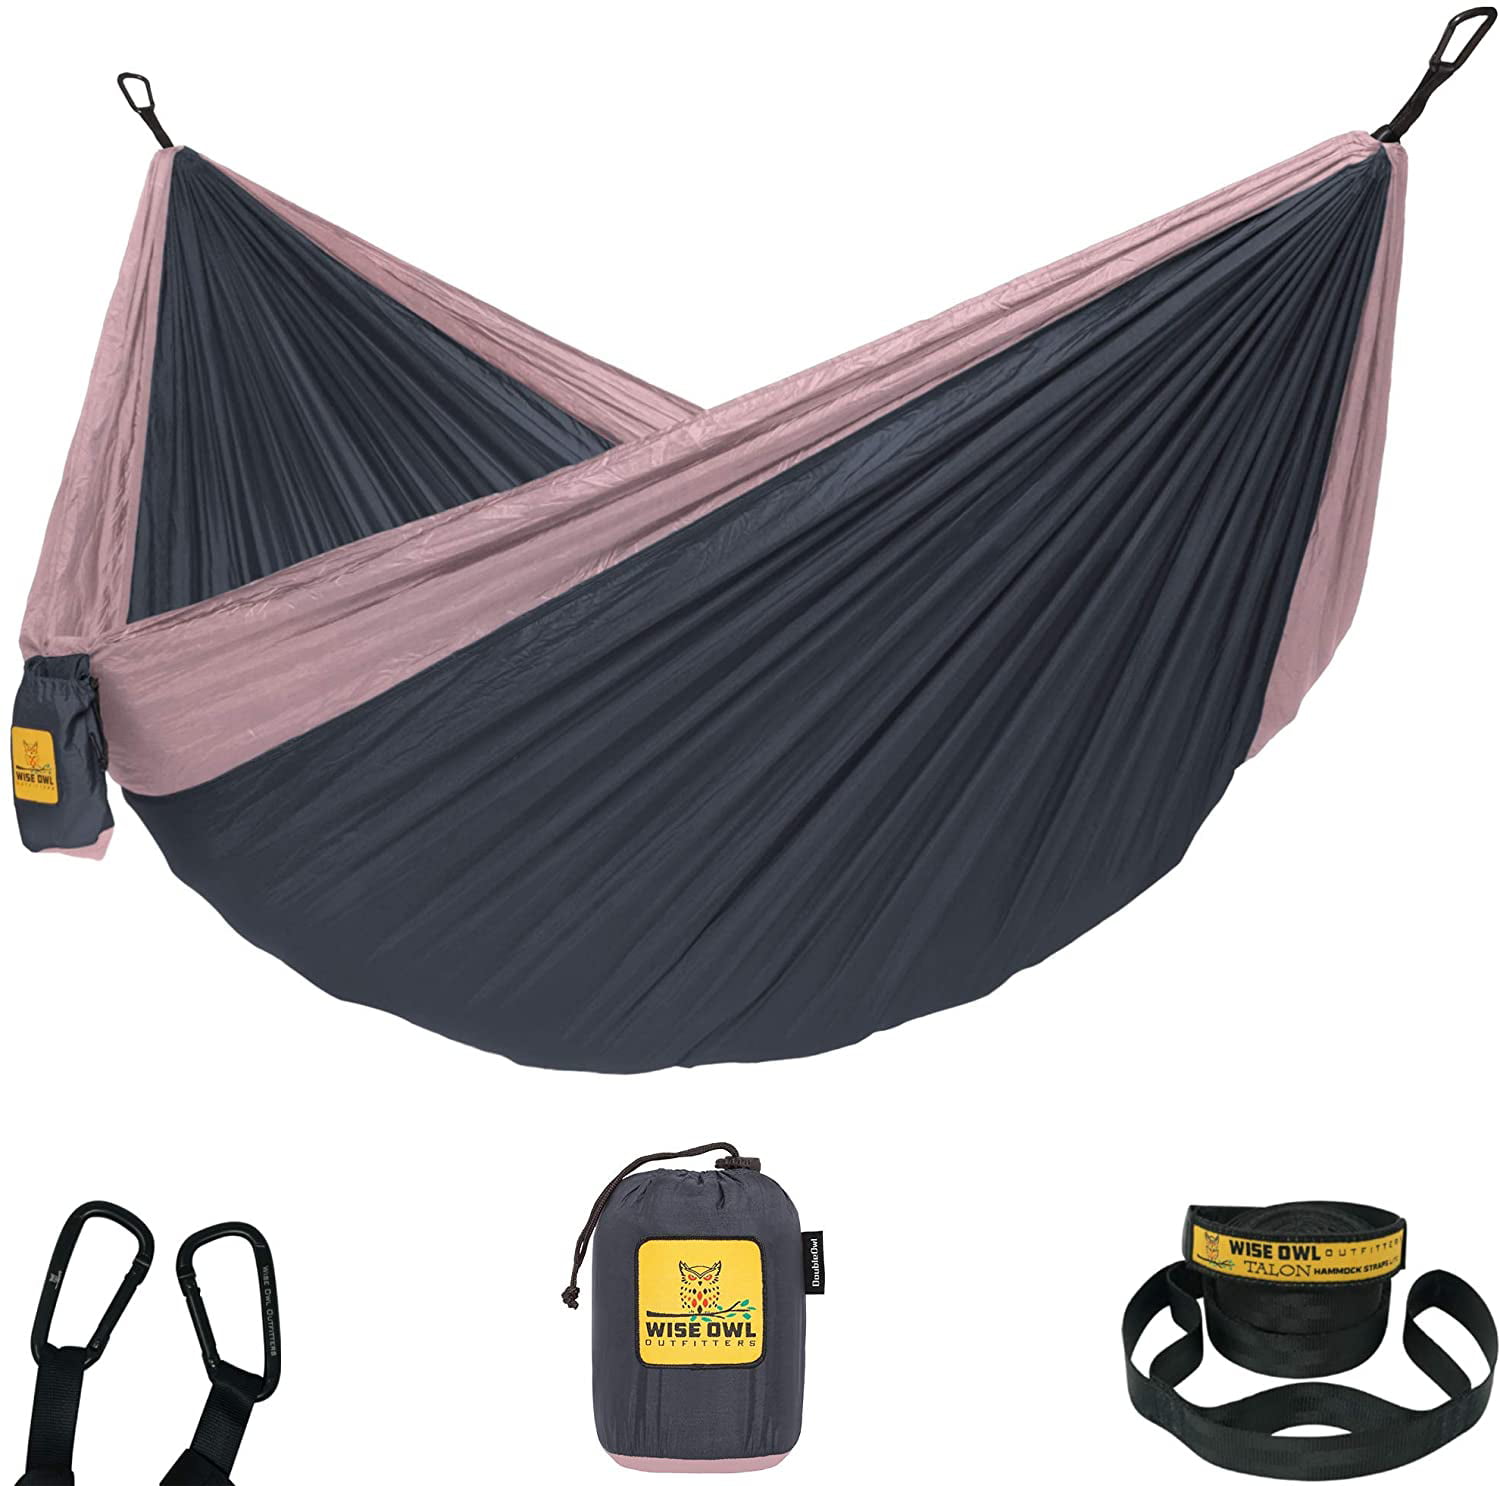 Indoor Outdoor Backpacking Survival & Travel Portable DOLib Wise Owl Outfitters Hammock Camping Double & Single with Tree Straps USA Based Hammocks Brand Gear 